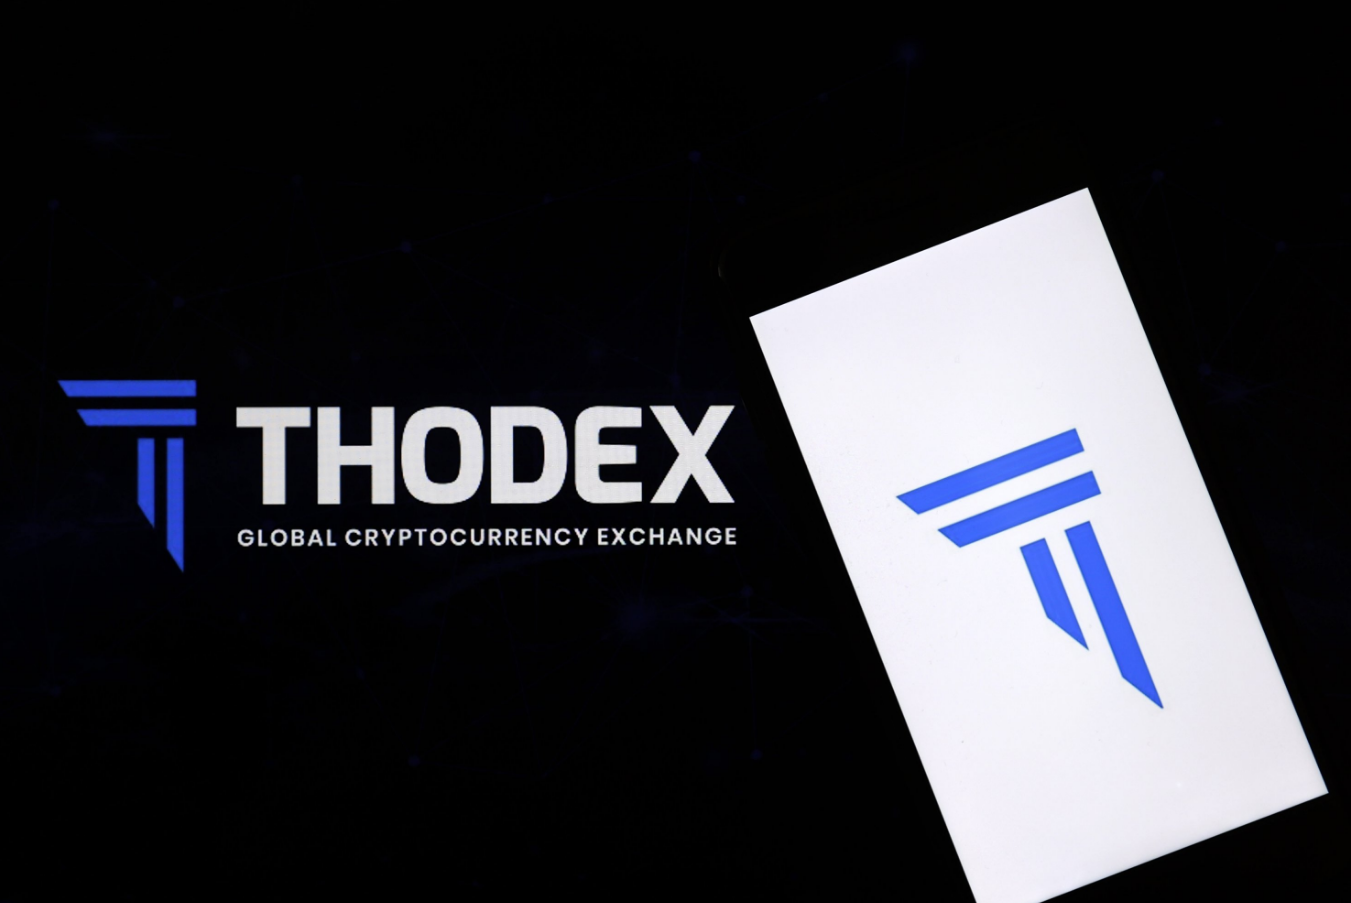 Turkey Seeks 40,000-year Jail Sentences For Thodex Crypto Exchange CEO and 21 Officials